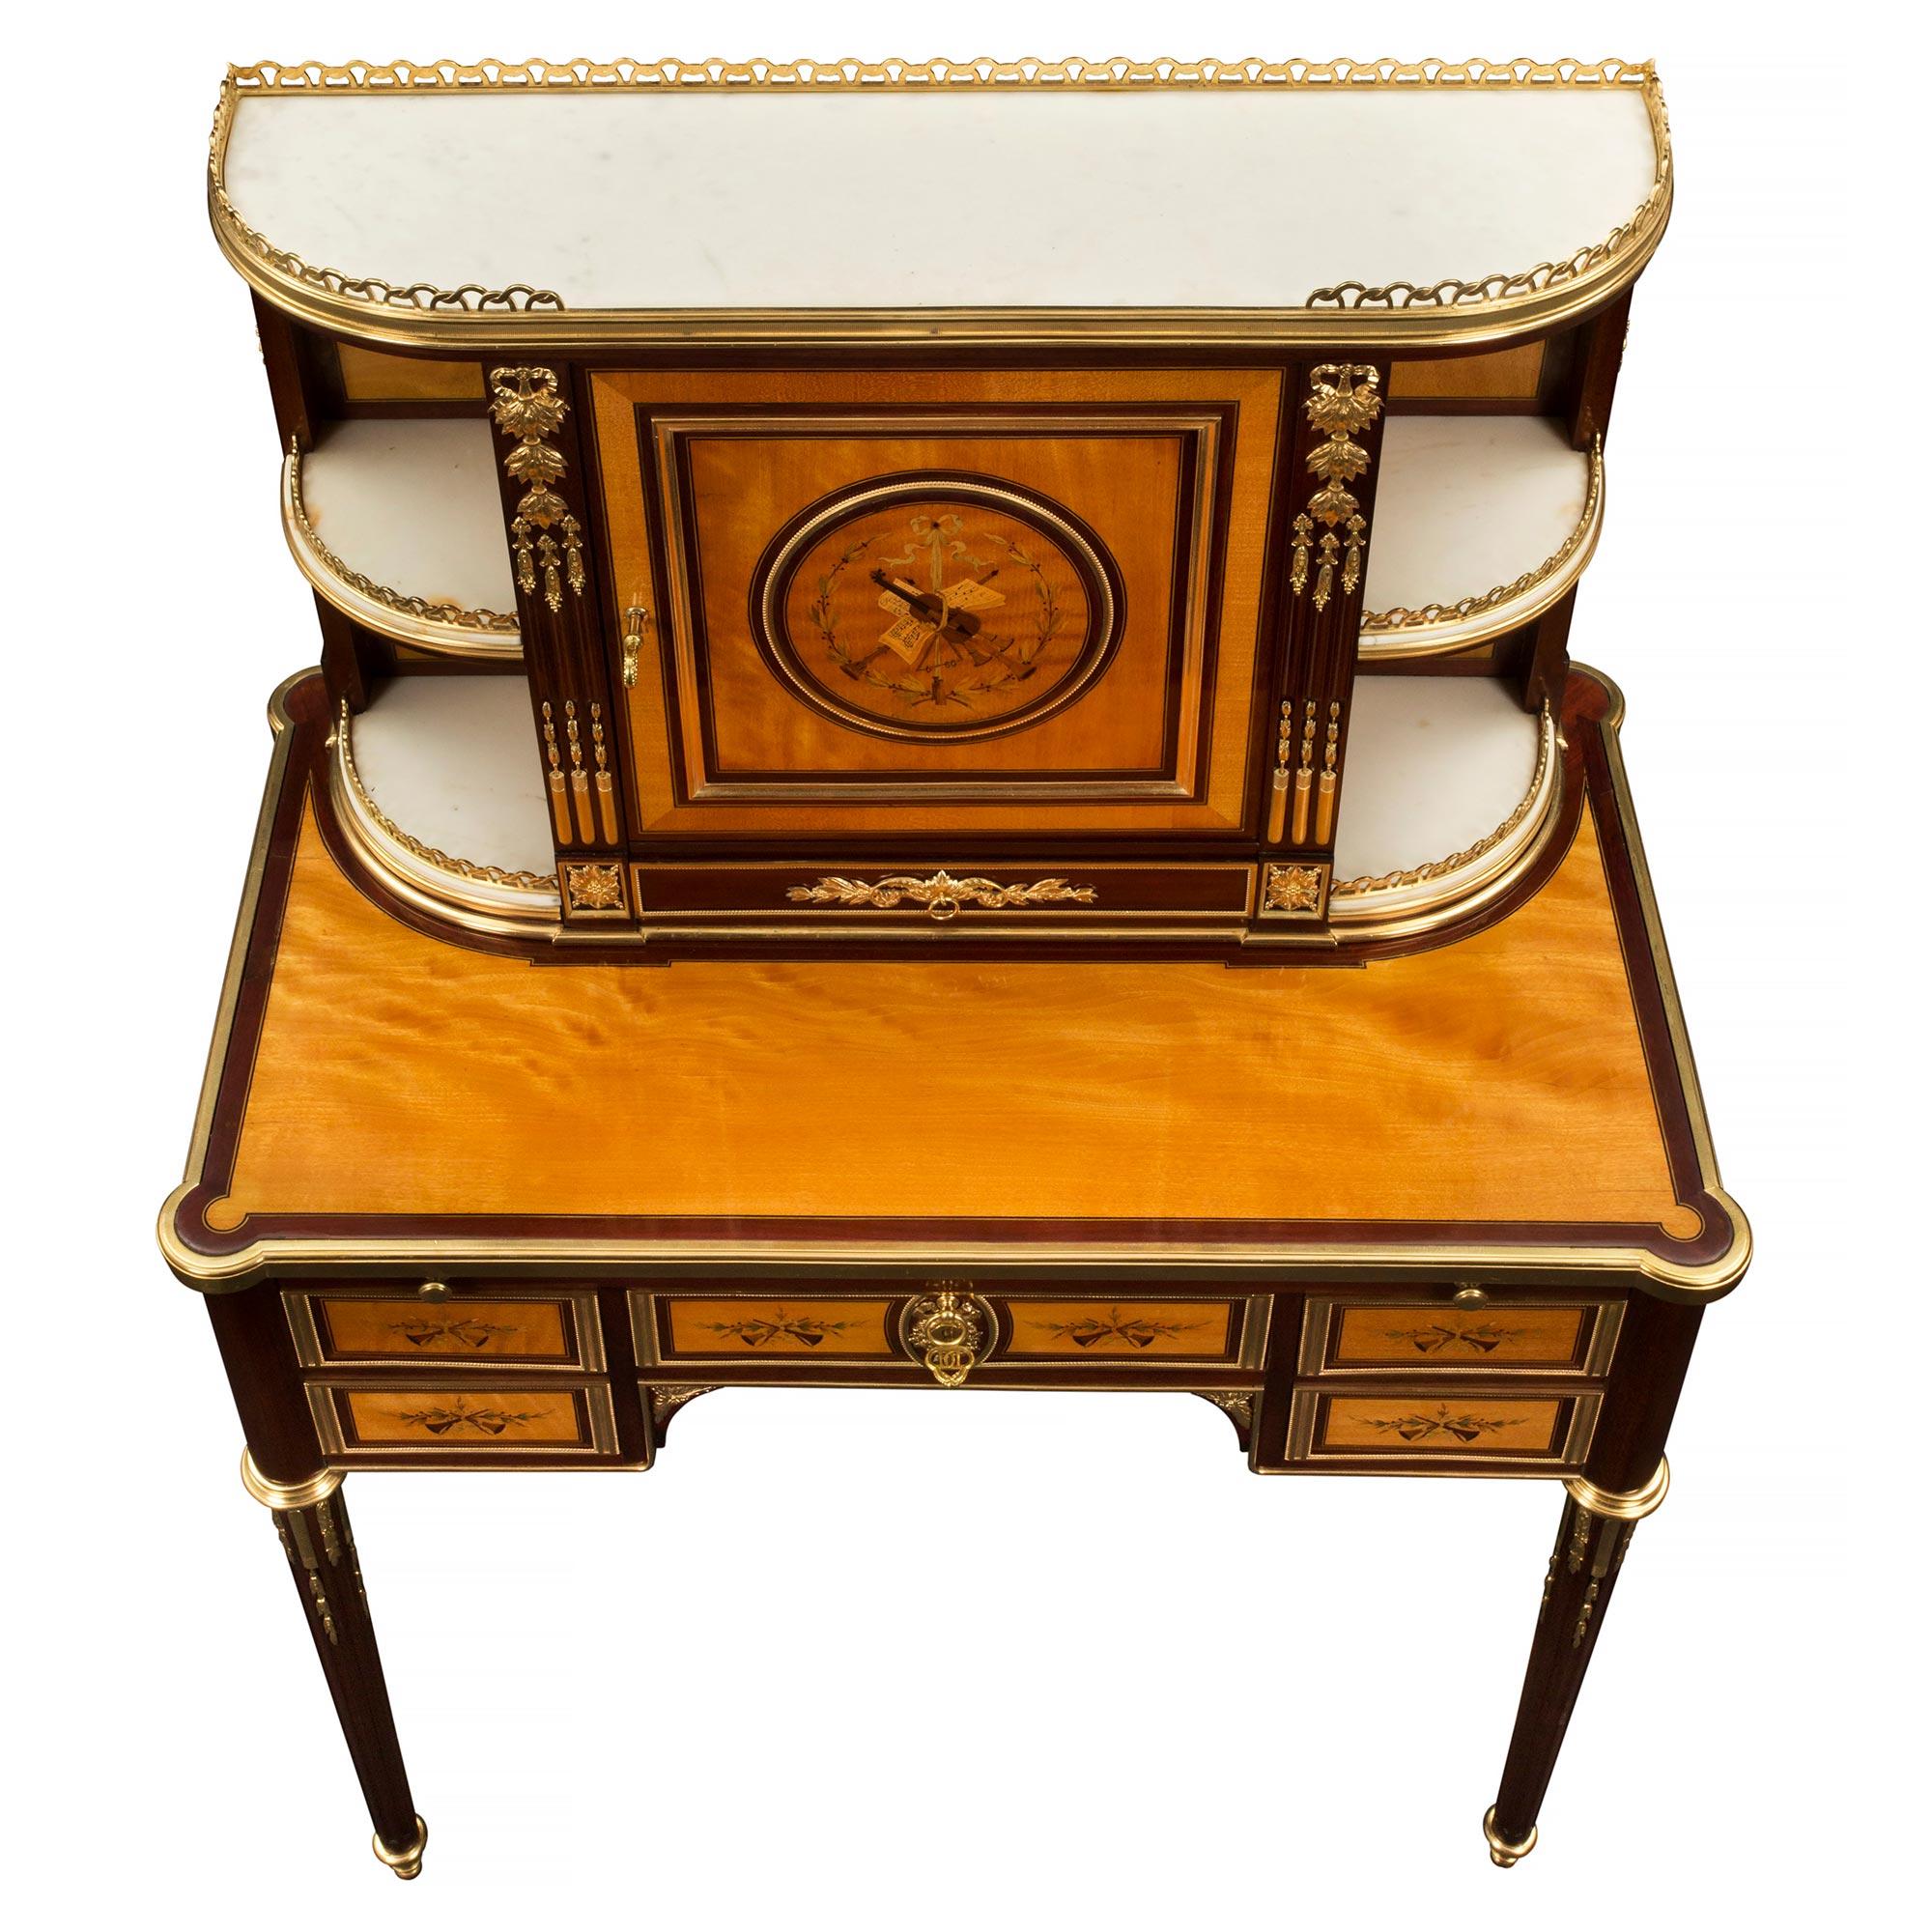 A magnificent pair of French early 19th century Louis XVI St. Bonheurs du Jours, which literally means, the joy of the day. A type of writing desk introduced in Paris by renowned interior decorators and purveyors of style - Marchands Merciers,